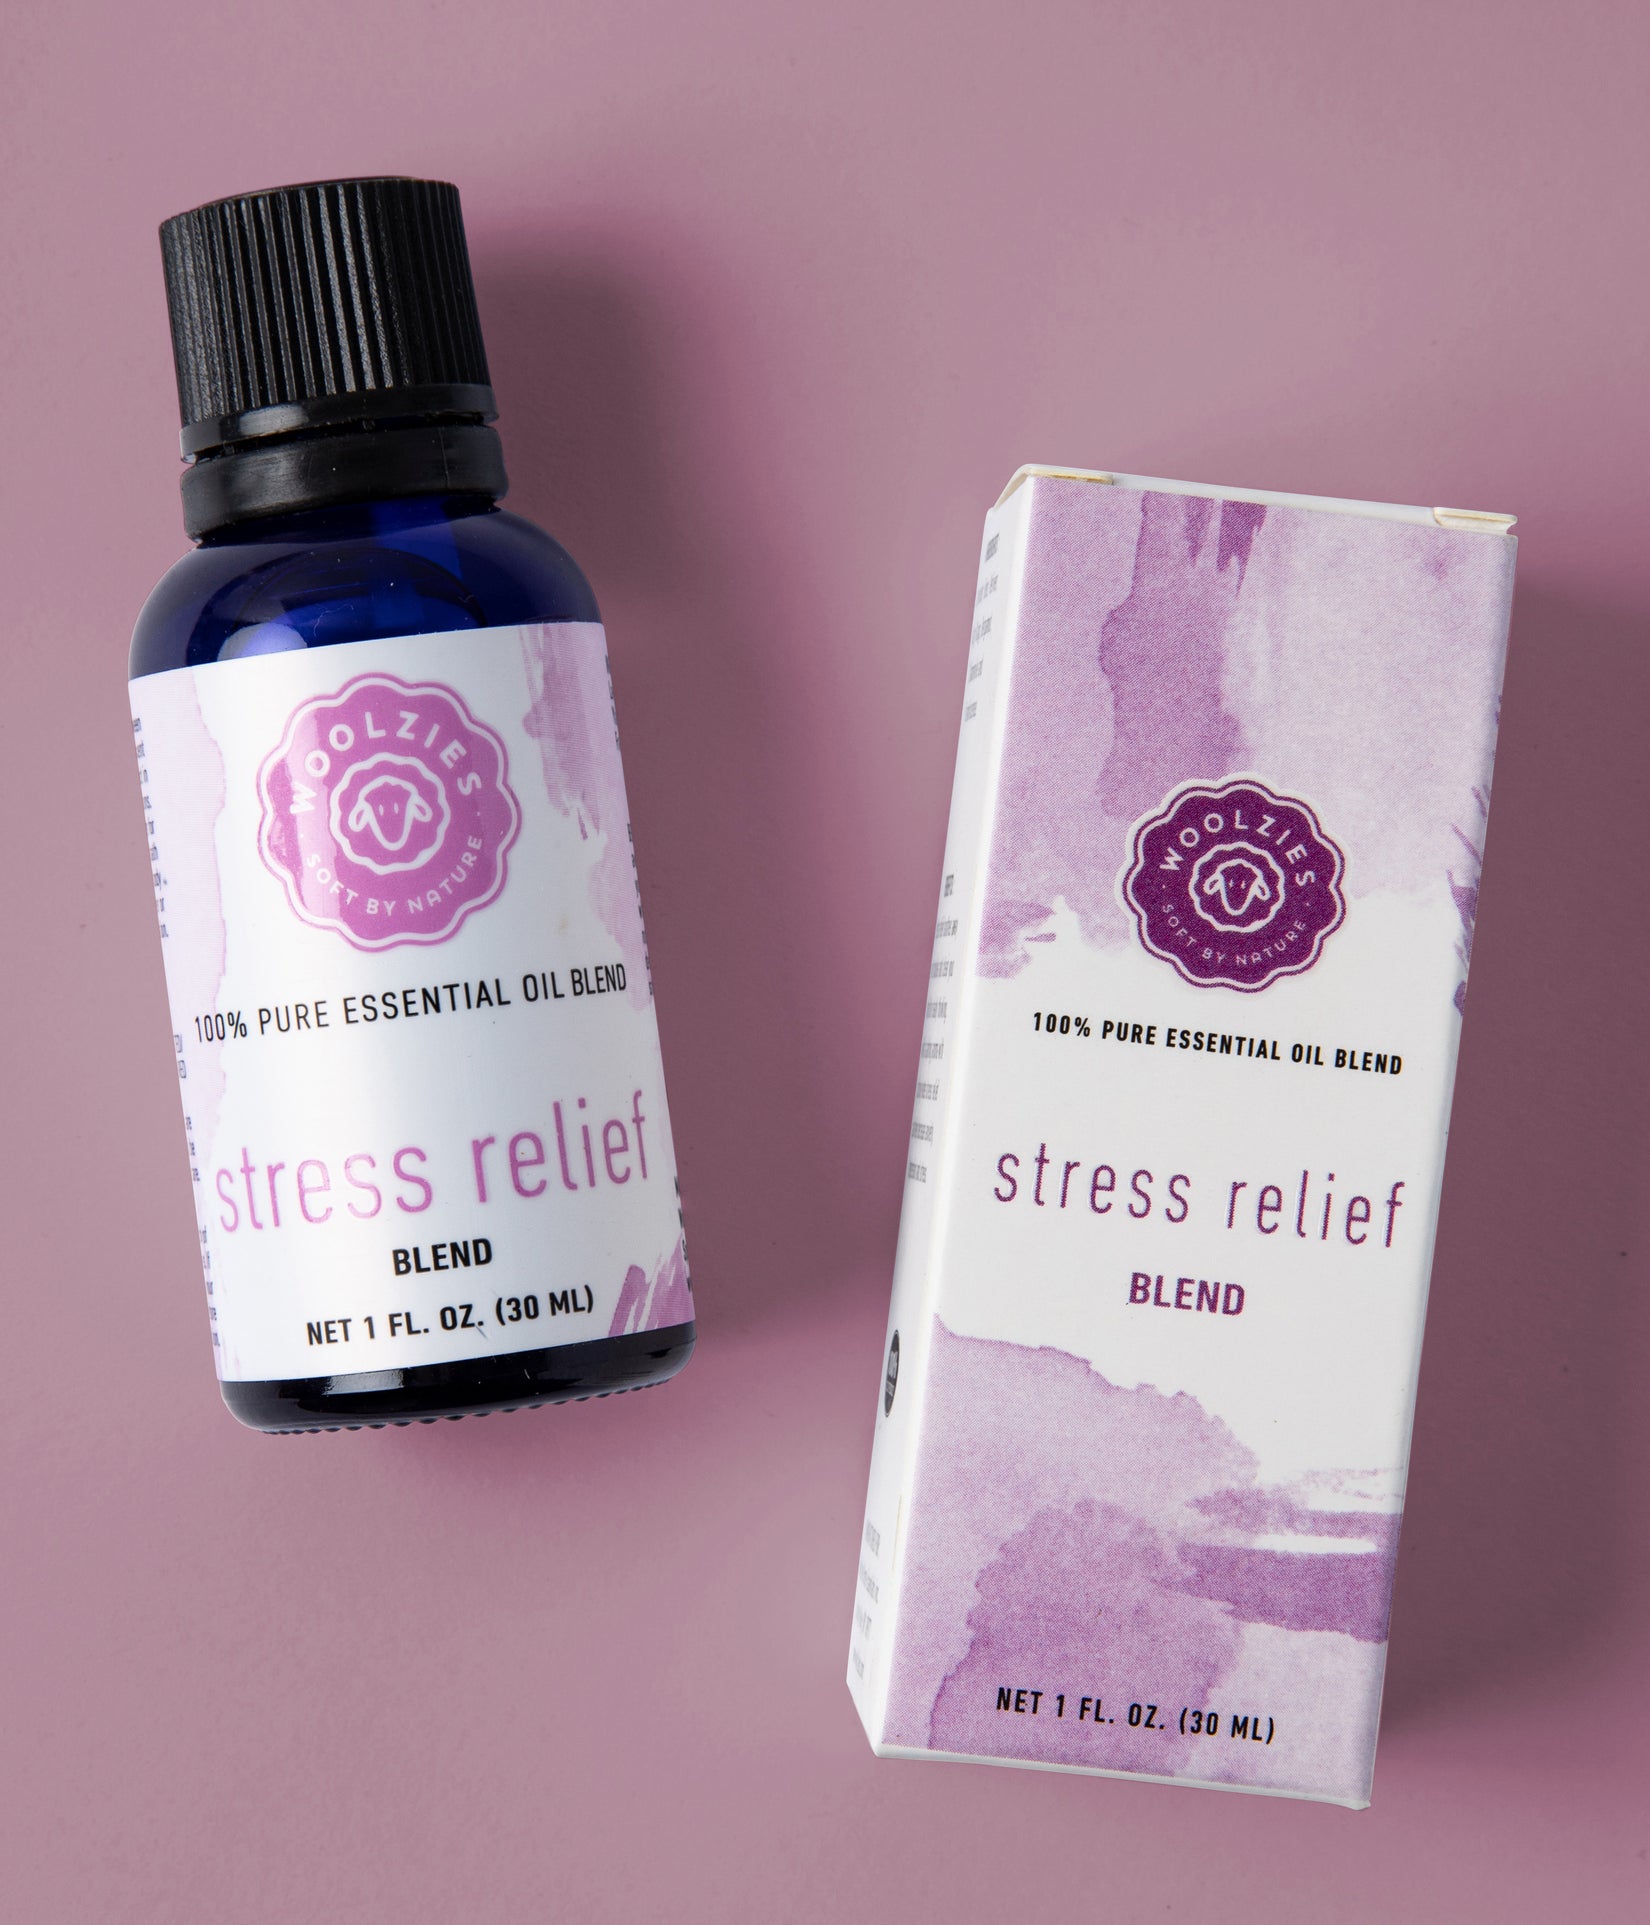 Calm Essential Oil Blend 2 oz - Stress Relief Relaxation Gifts for Women -  Calm Sleep, Destress Aromatherapy